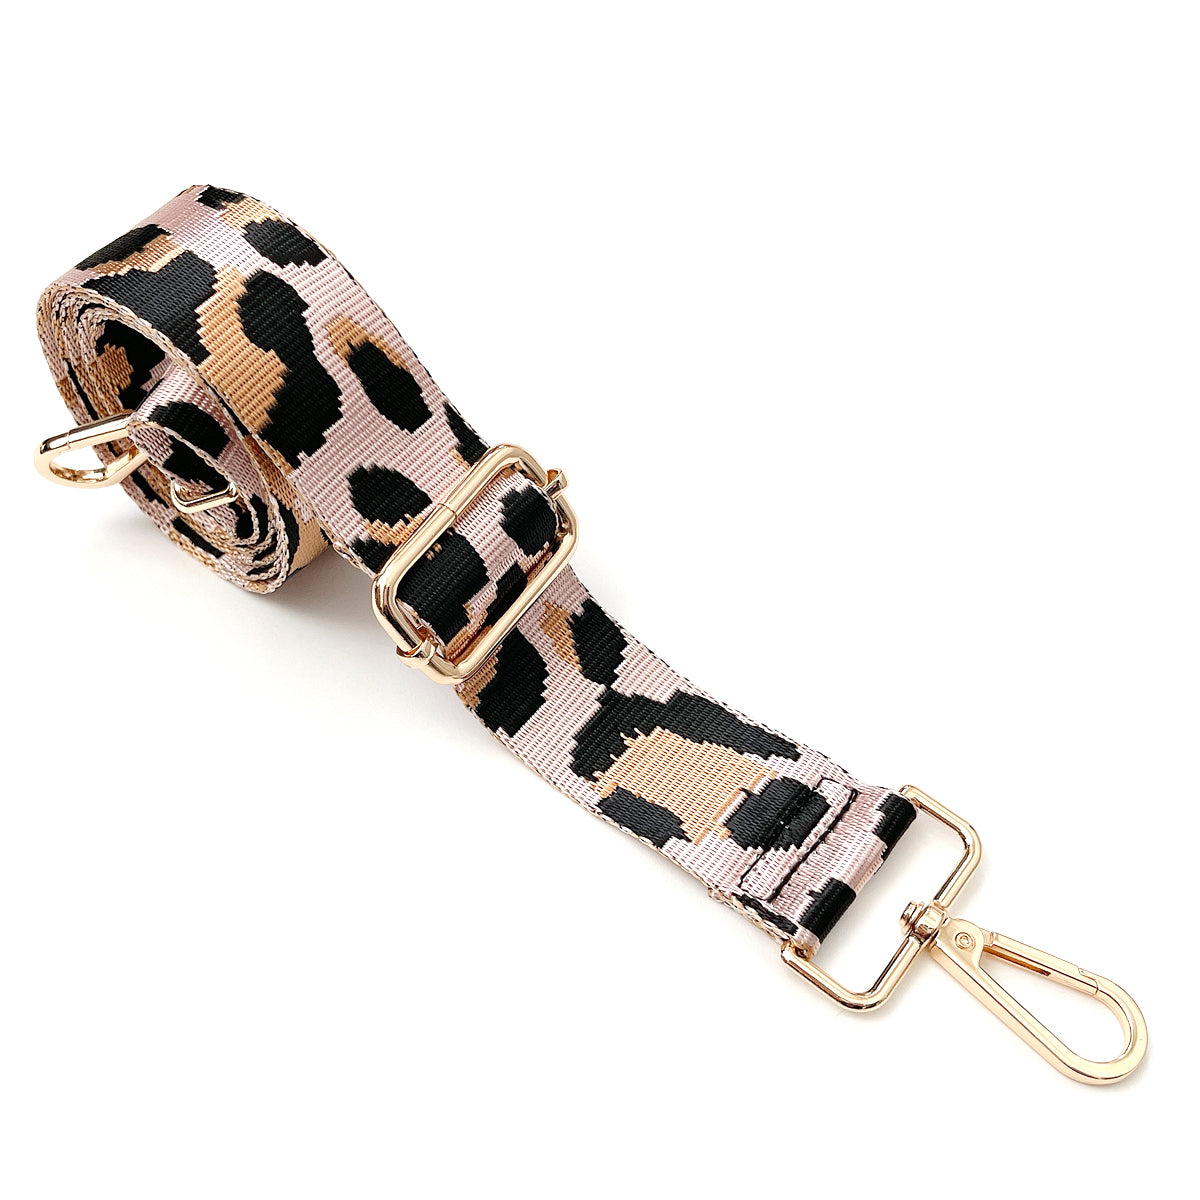 Wrapables Wide Adjustable Crossbody Handbag Strap, Women's Replacement Bag Strap for Purses Gray Leopard Print